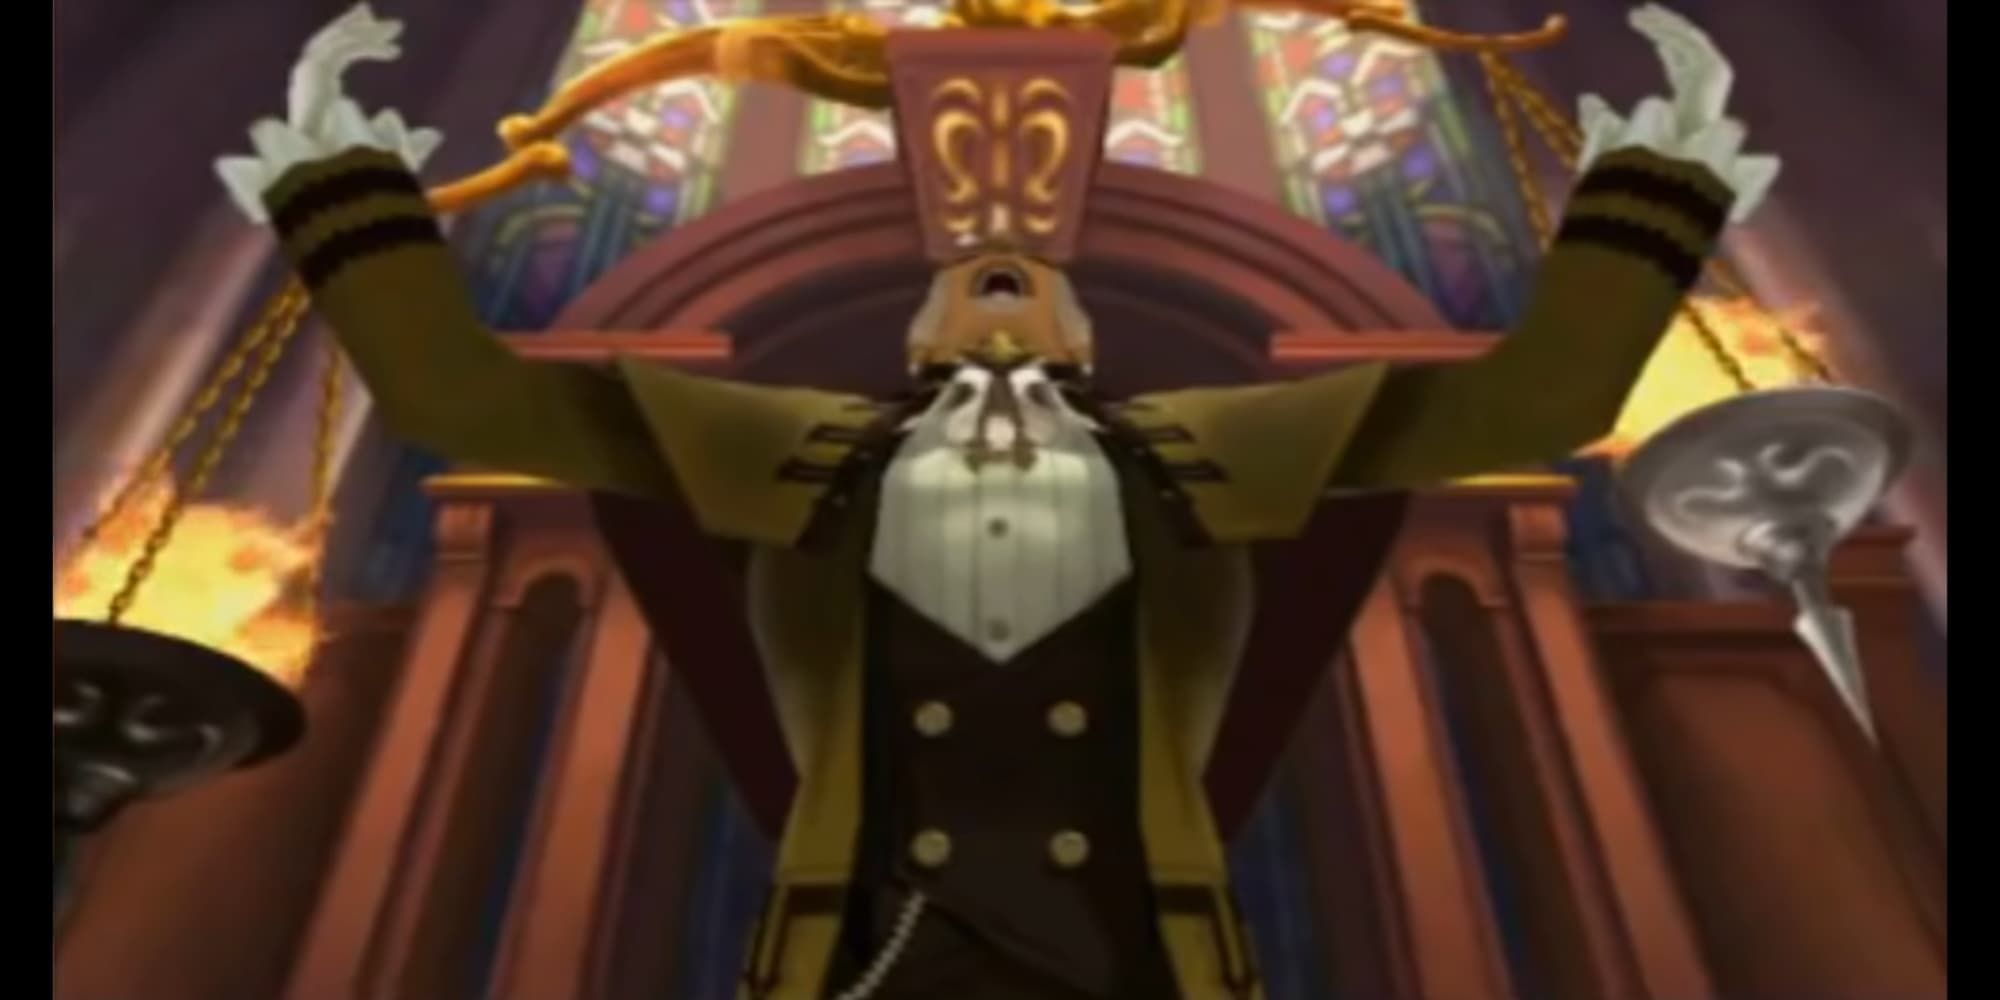 Ace Attorney Mael breakdown at judge's podium in court wearing a gold and black suit staring up and arms outstretched up